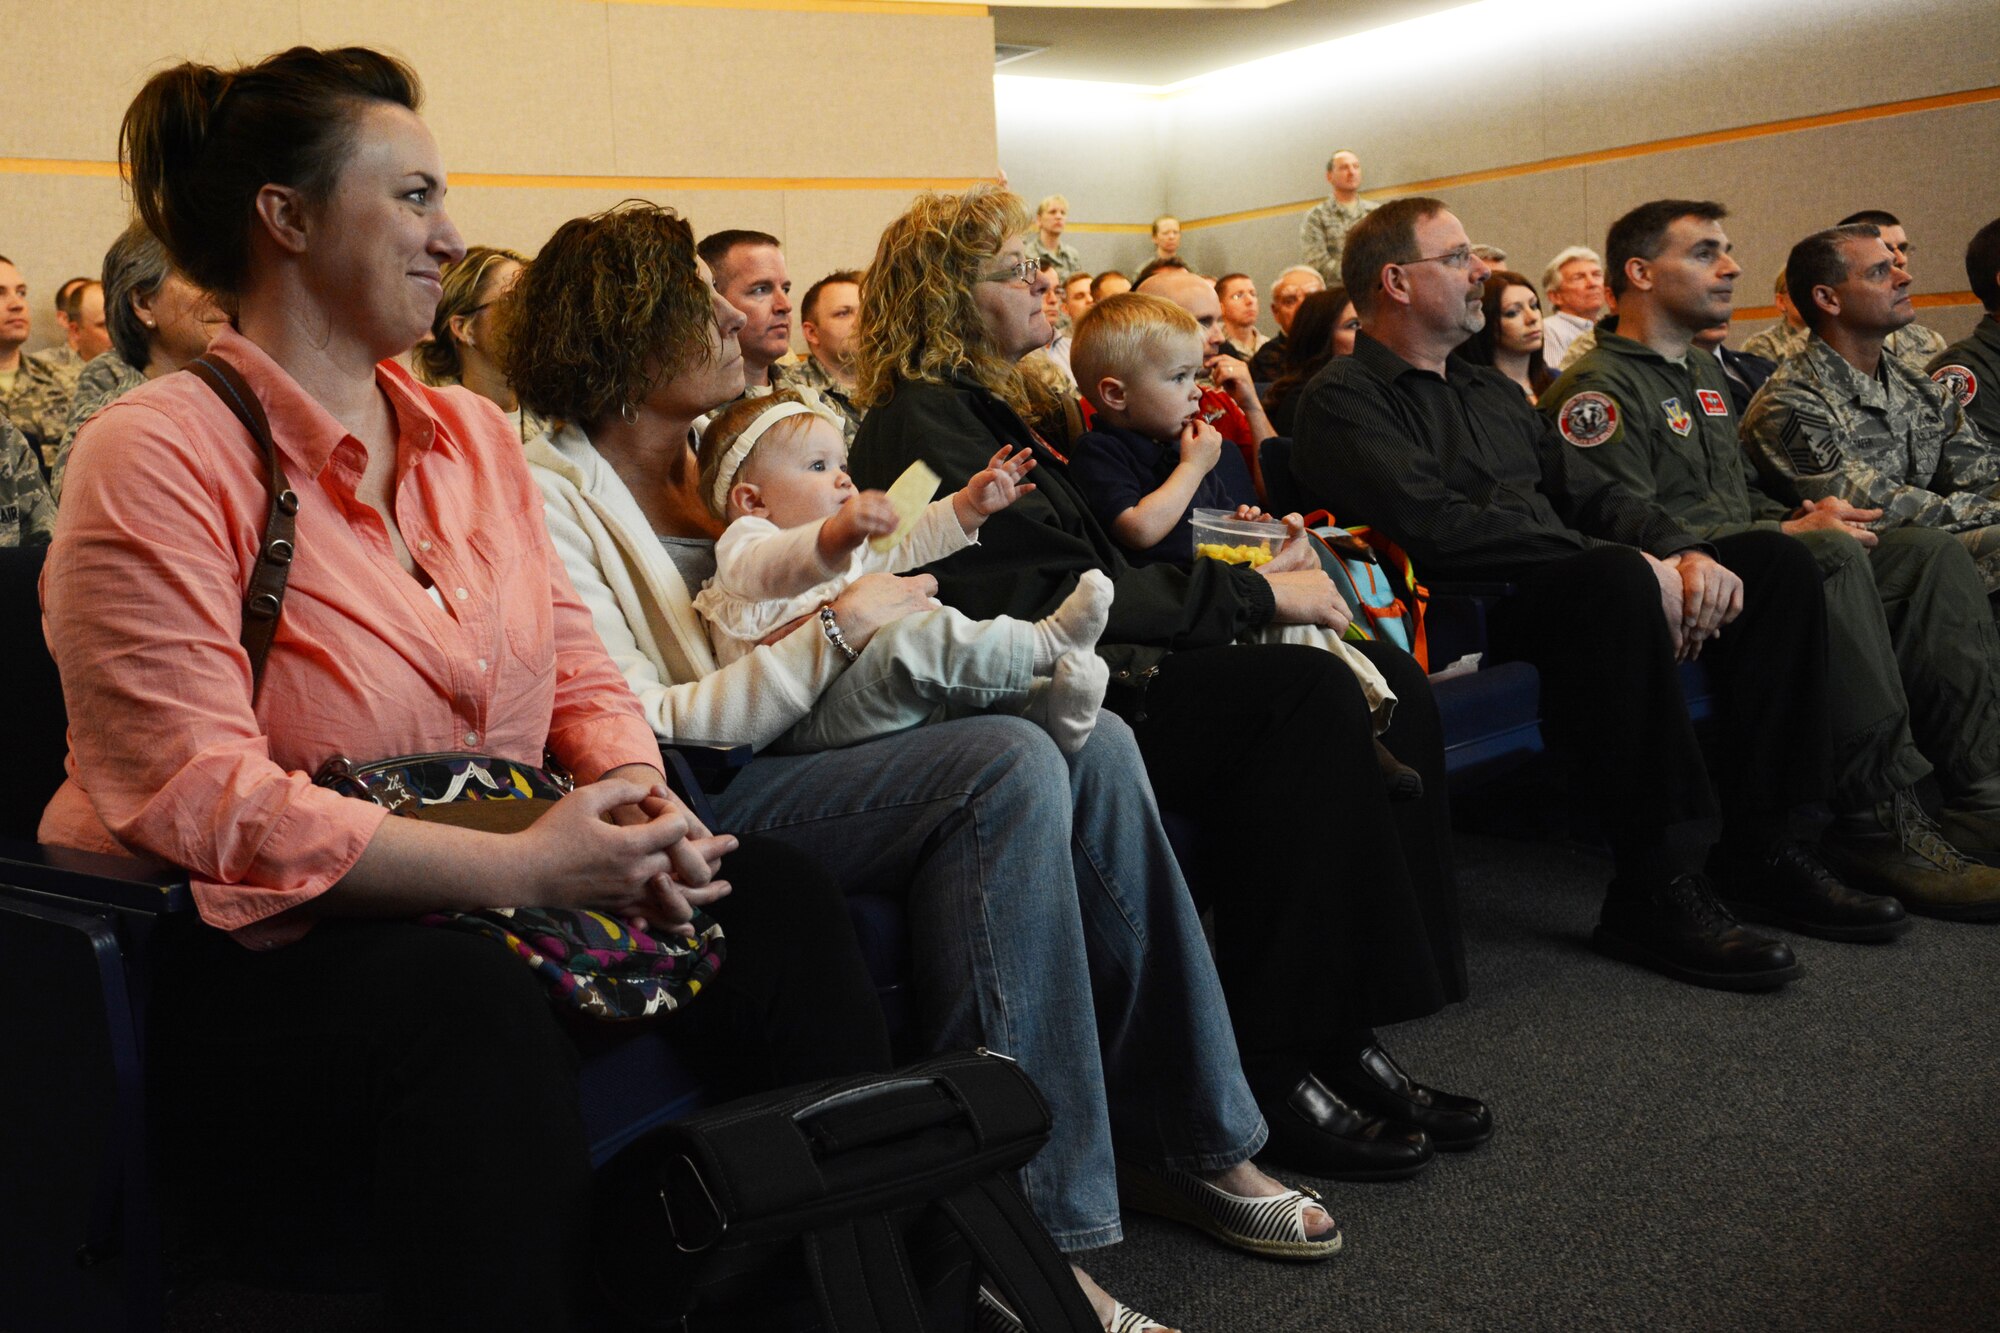 A room full of people watch Master Sgt. Joshua Johnson, 115th Fighter Wing budget analyst, receive a Purple Heart medal during a ceremony at the 115 FW in Madison, Wis., May 3, 2014. Johnson was awarded the medal after being thrown from his gunner’s seat and injured during a 2005 deployment. (Air National Guard photo by Senior Airman Andrea F. Liechti)